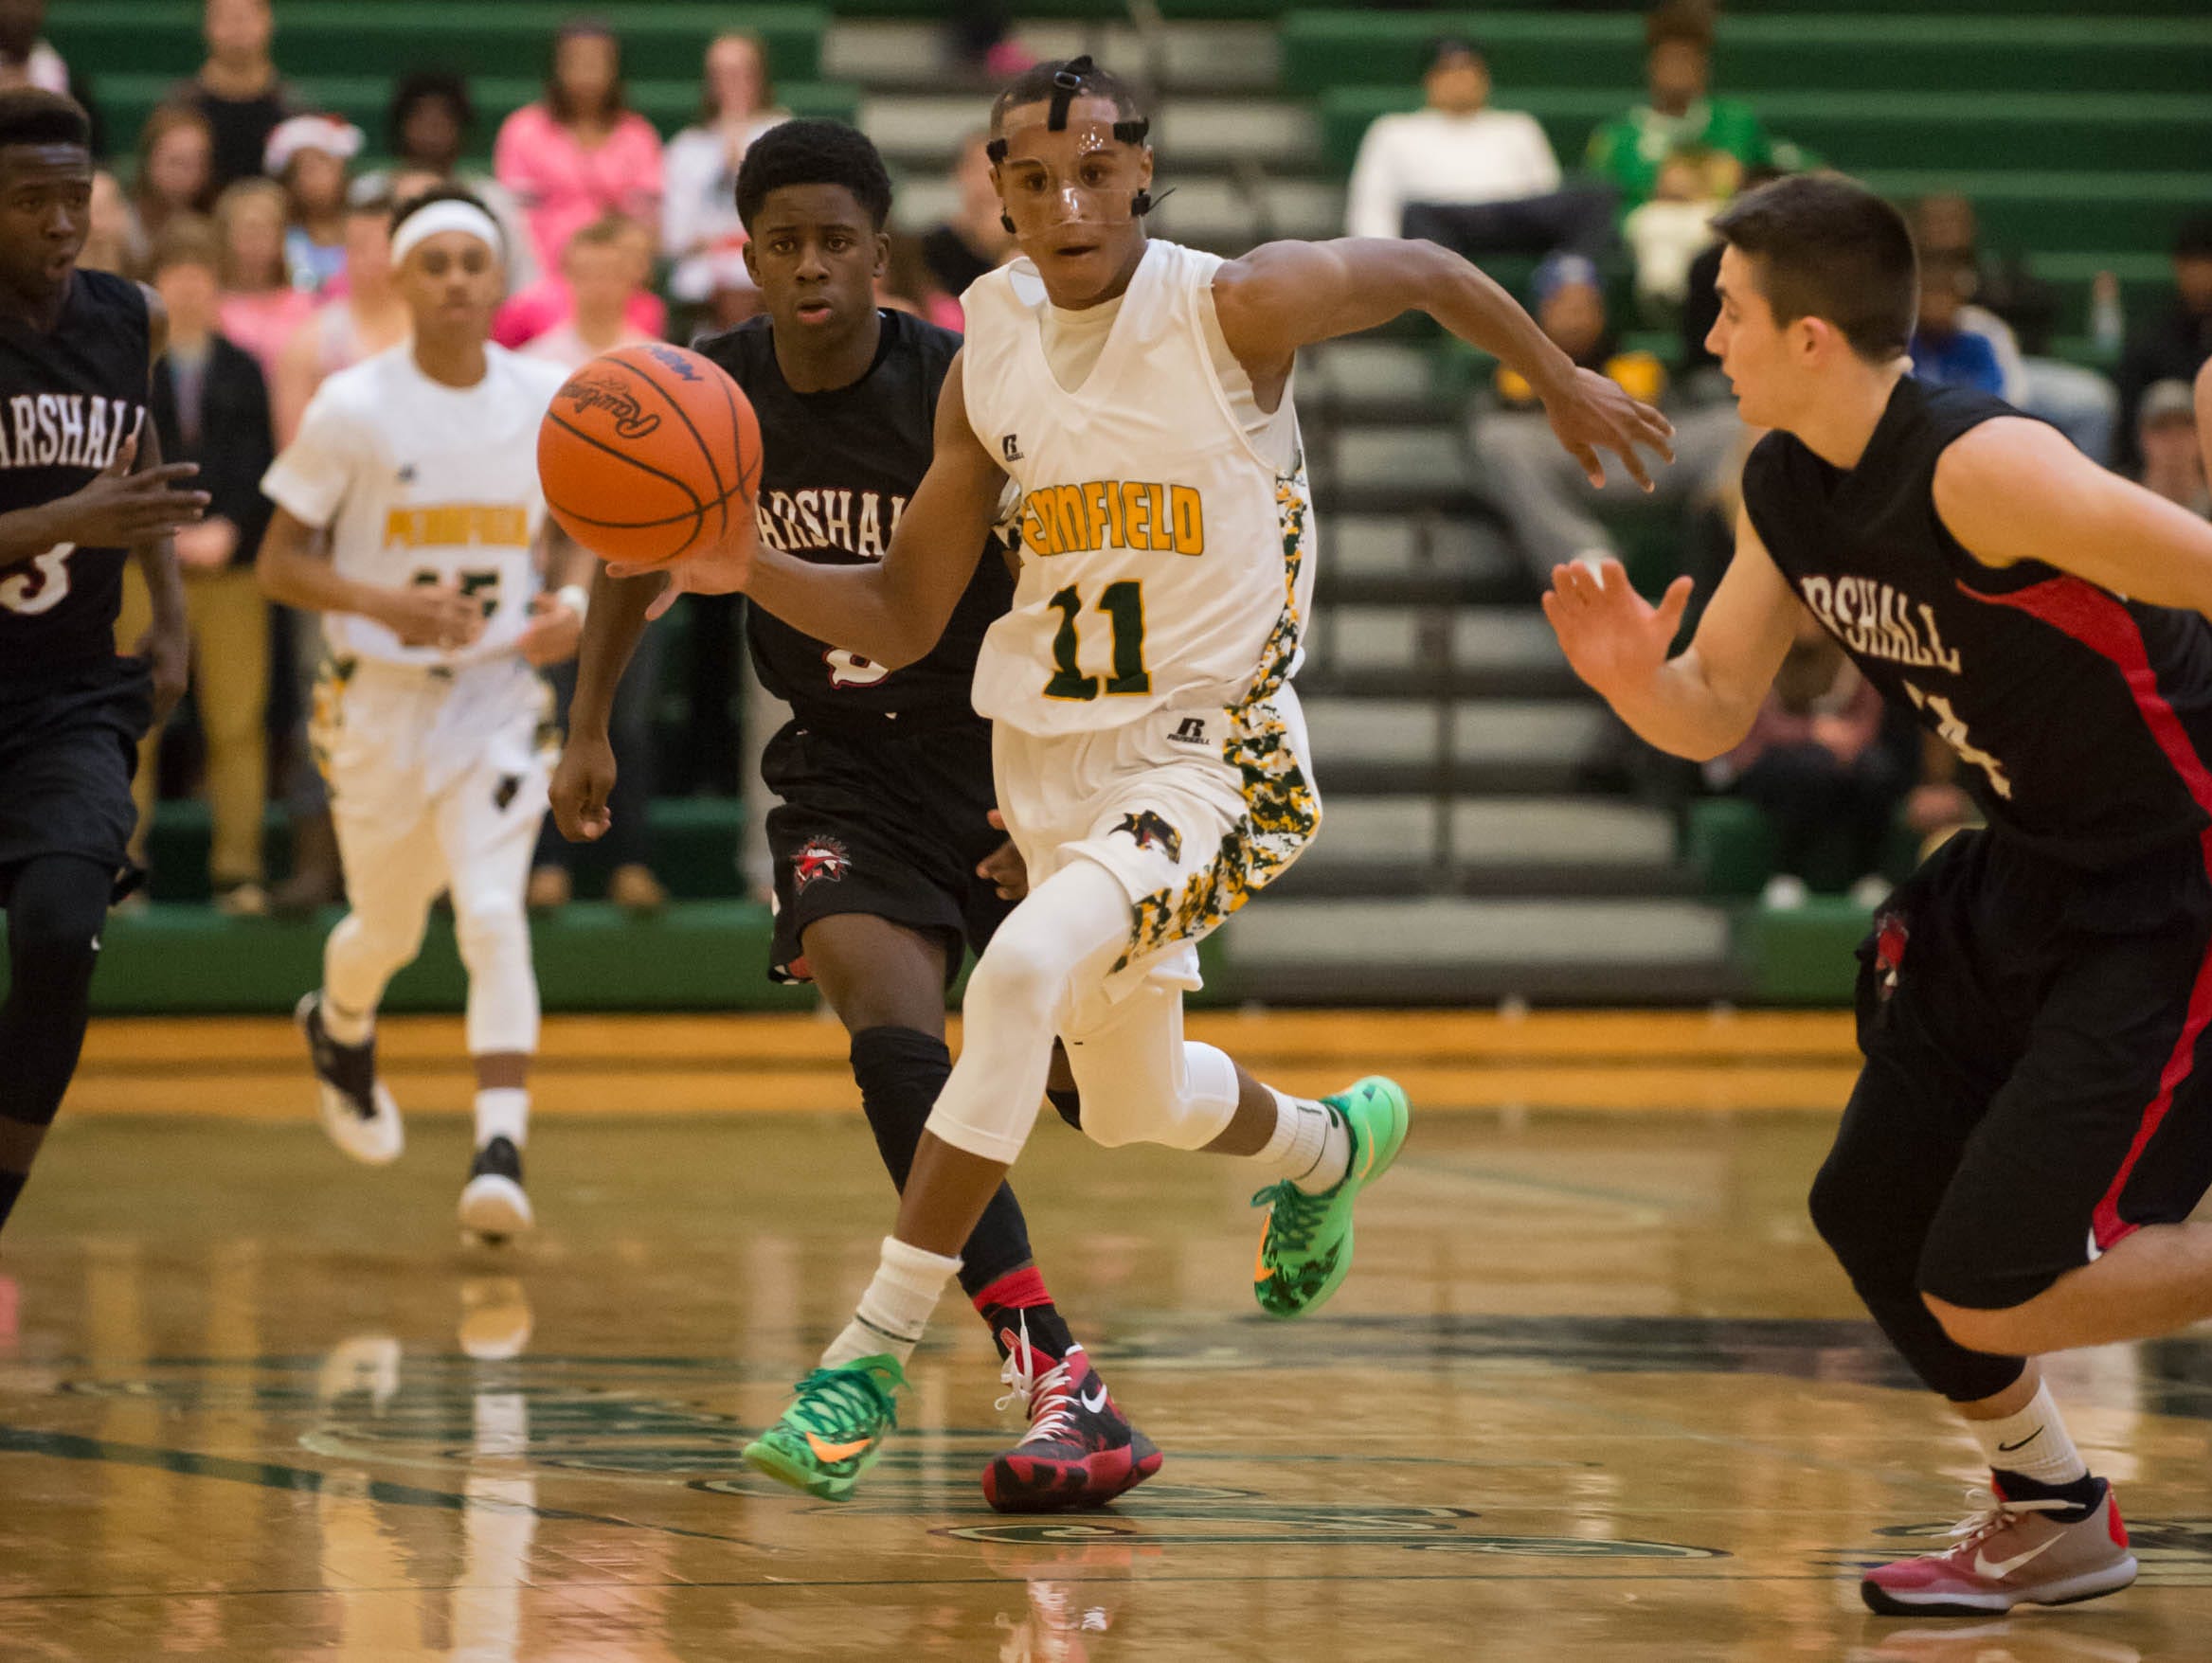 Pennfield's Francois Jamierson (11) bring the ball down the court during Friday night's game.